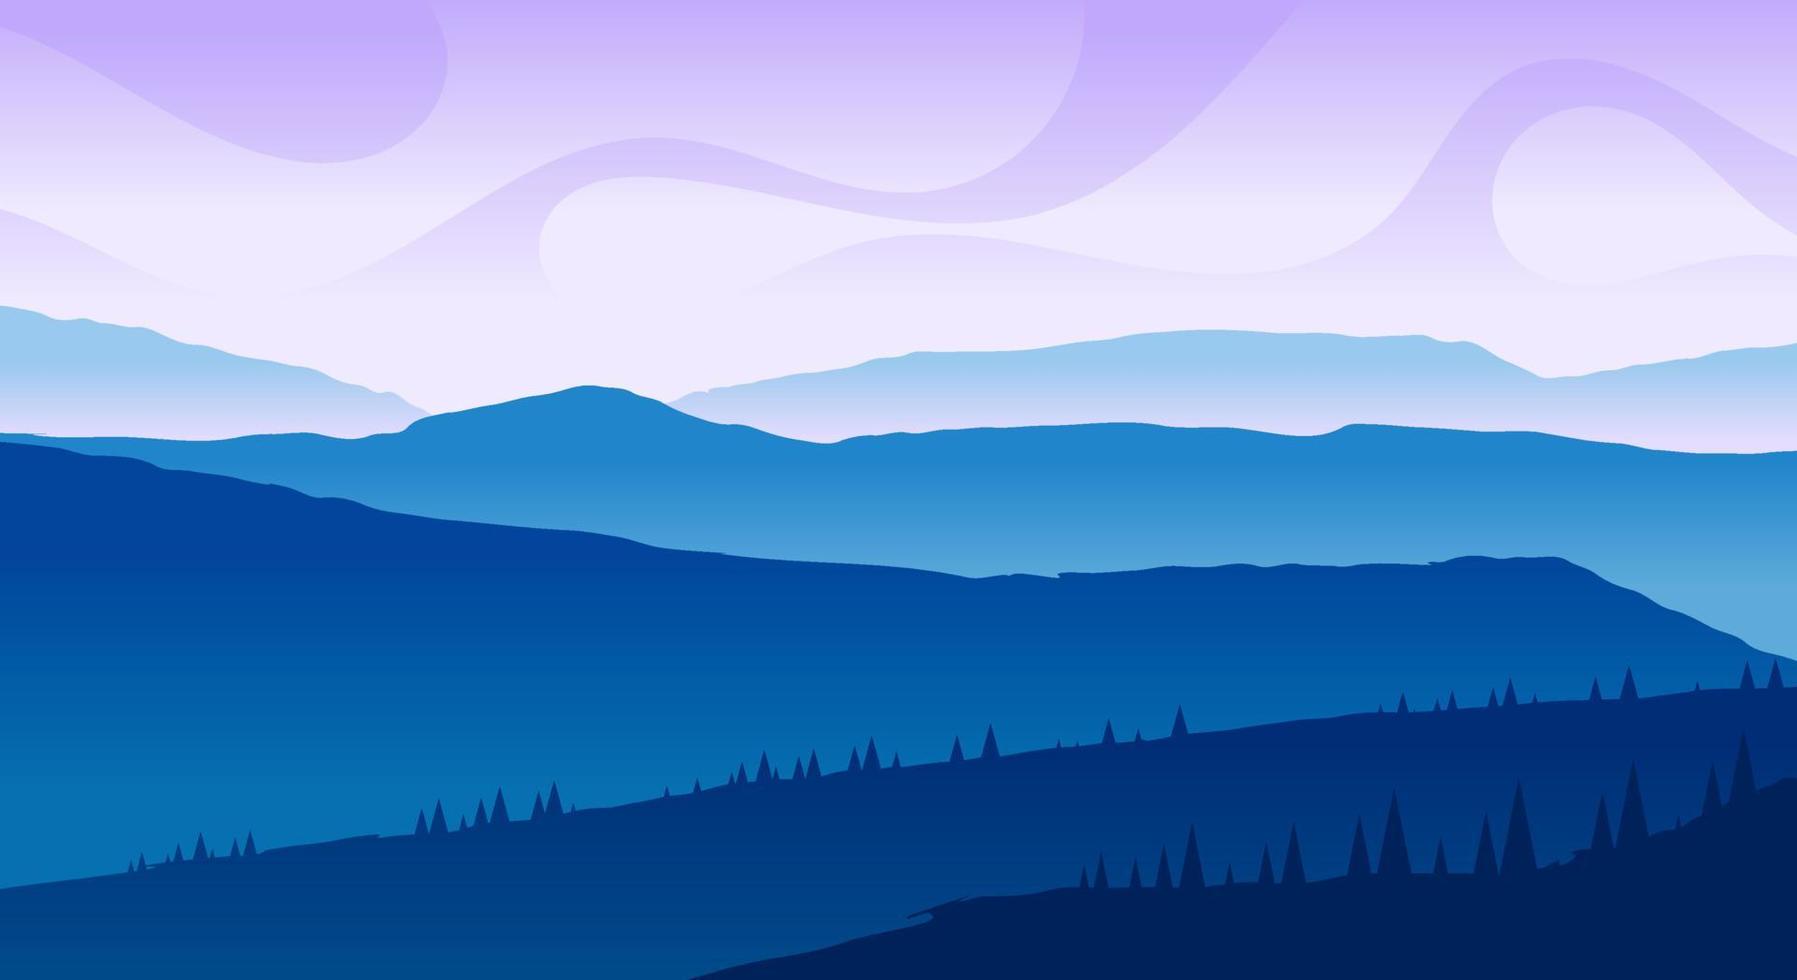 Natural landscape silhouette of hills with cold weather vectors and illustrations